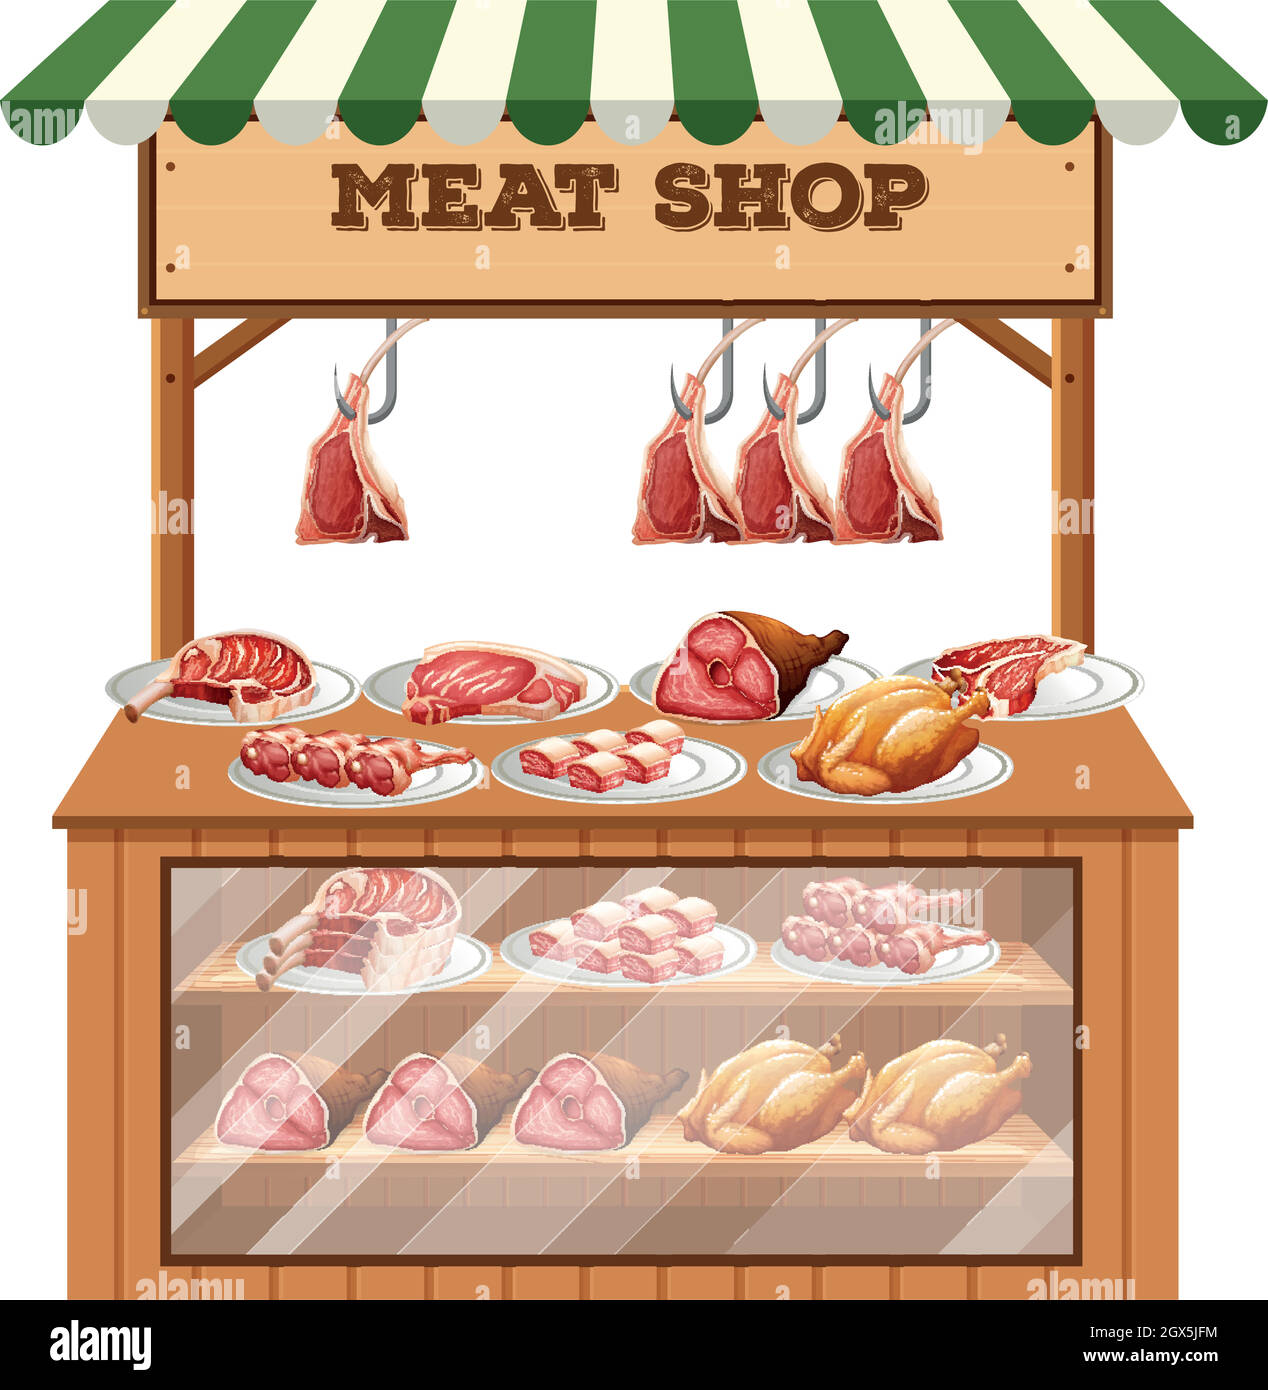 Food Clipart-butcher holding knife with meats hanging in background clipart